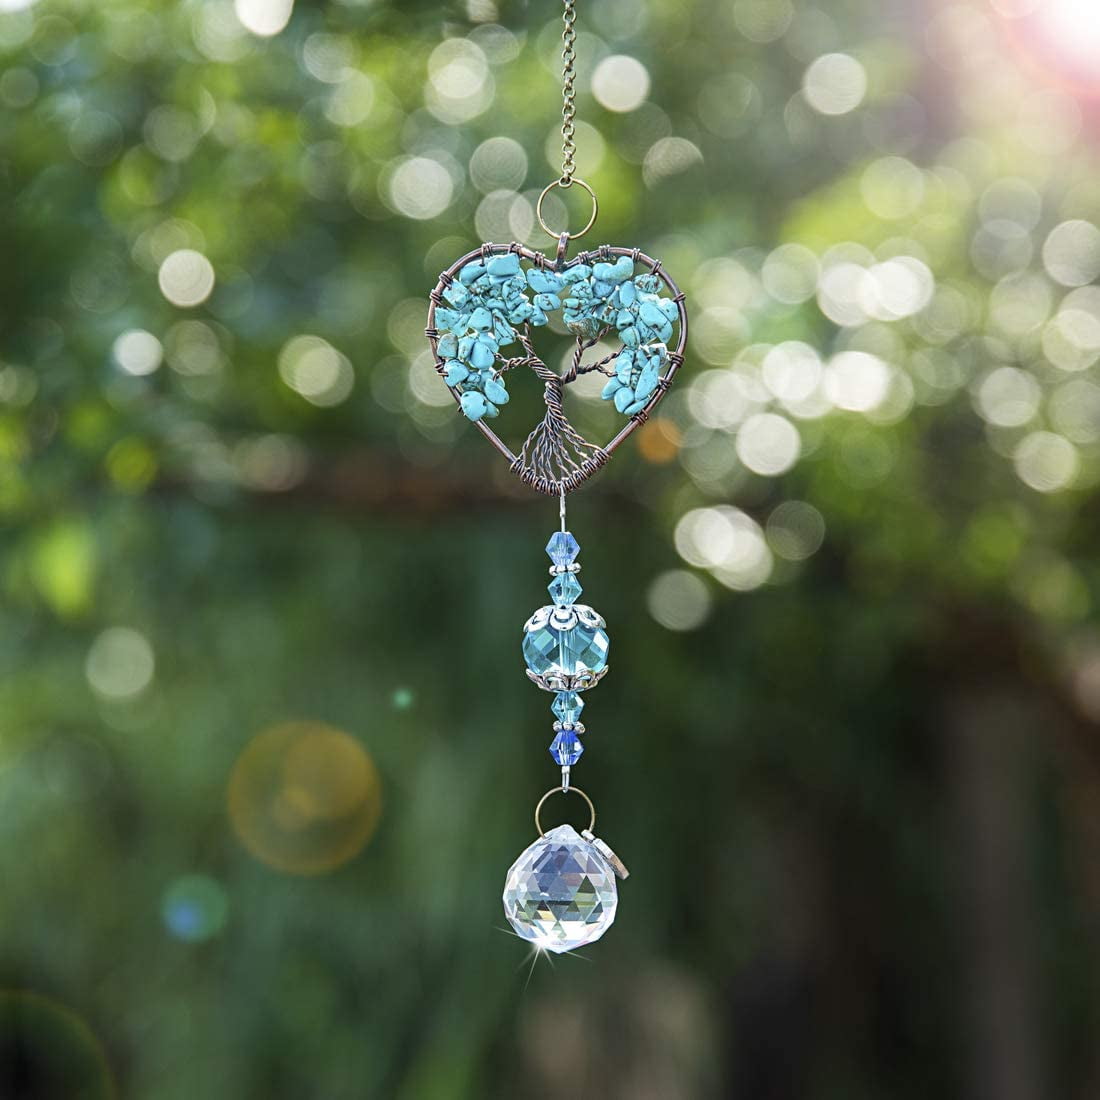 H&D HYALINE & DORA Sun Catcher Crystal Tree of Life Rainbow Maker Drops  Hang for Window, Home Decor, Car Charms